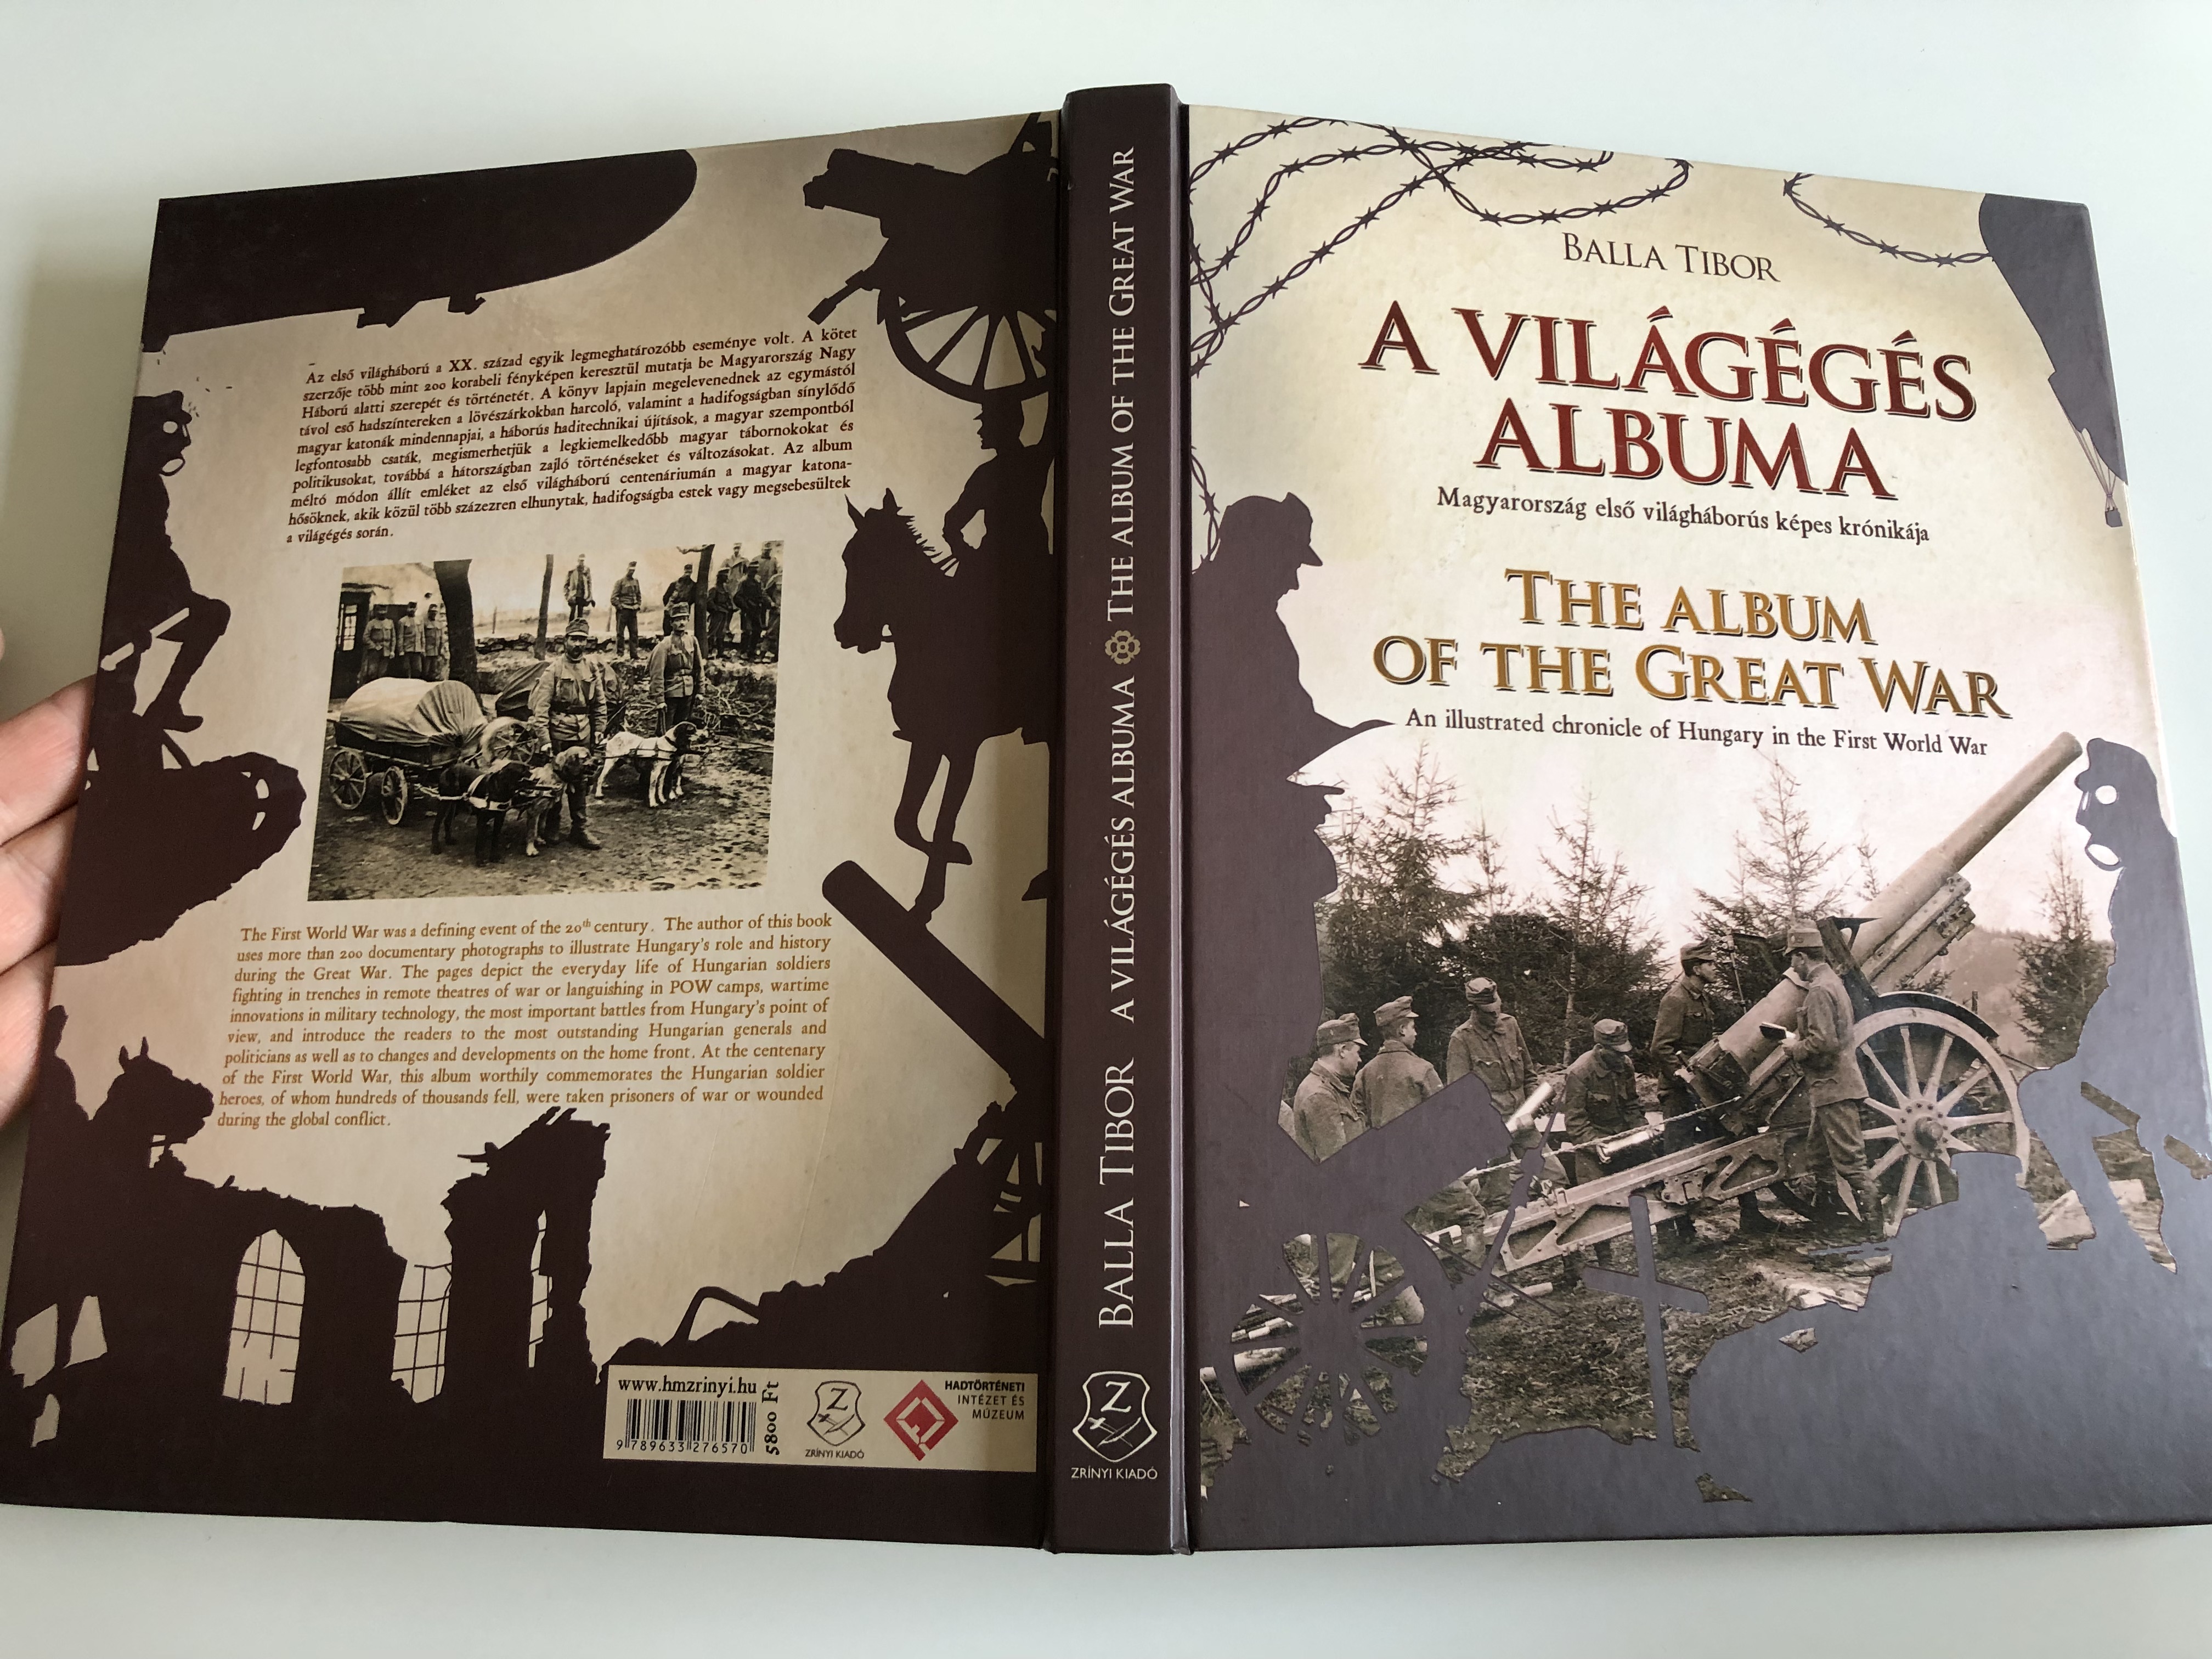 the-album-of-the-great-war-by-balla-tibor-an-illustrated-chronicle-of-hungary-in-the-first-world-war-english-hungarian-bilingual-edition-balla-tibor-a-vil-g-g-s-albuma-18-.jpg